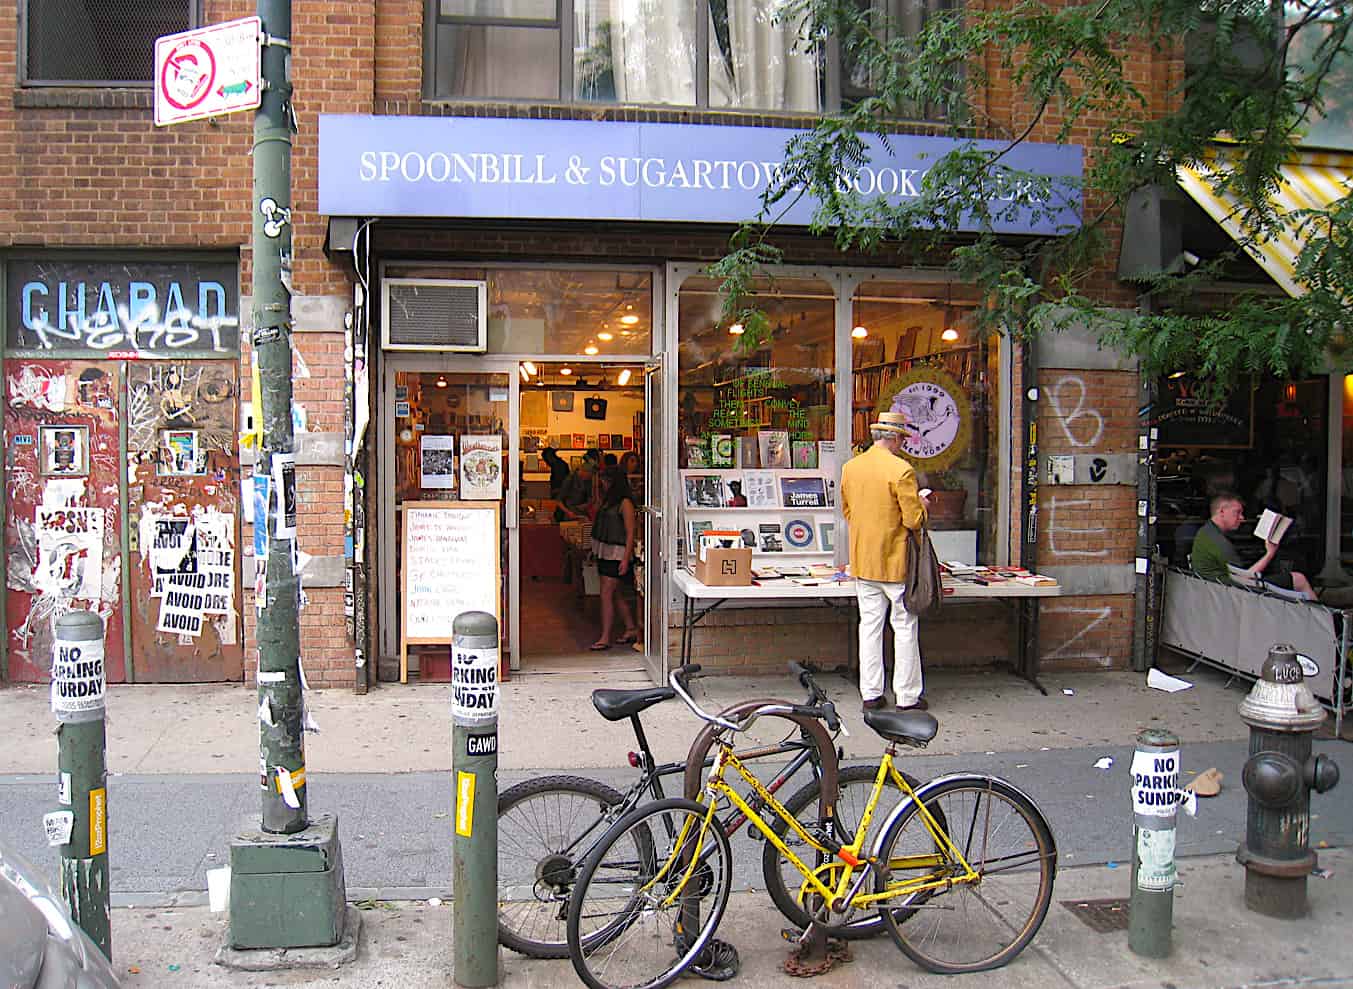 The unassuming exteriorof Spoonbill and Sugartown Bookstore in Brooklyn. This image was taken by St. Savage on Flickr.com.